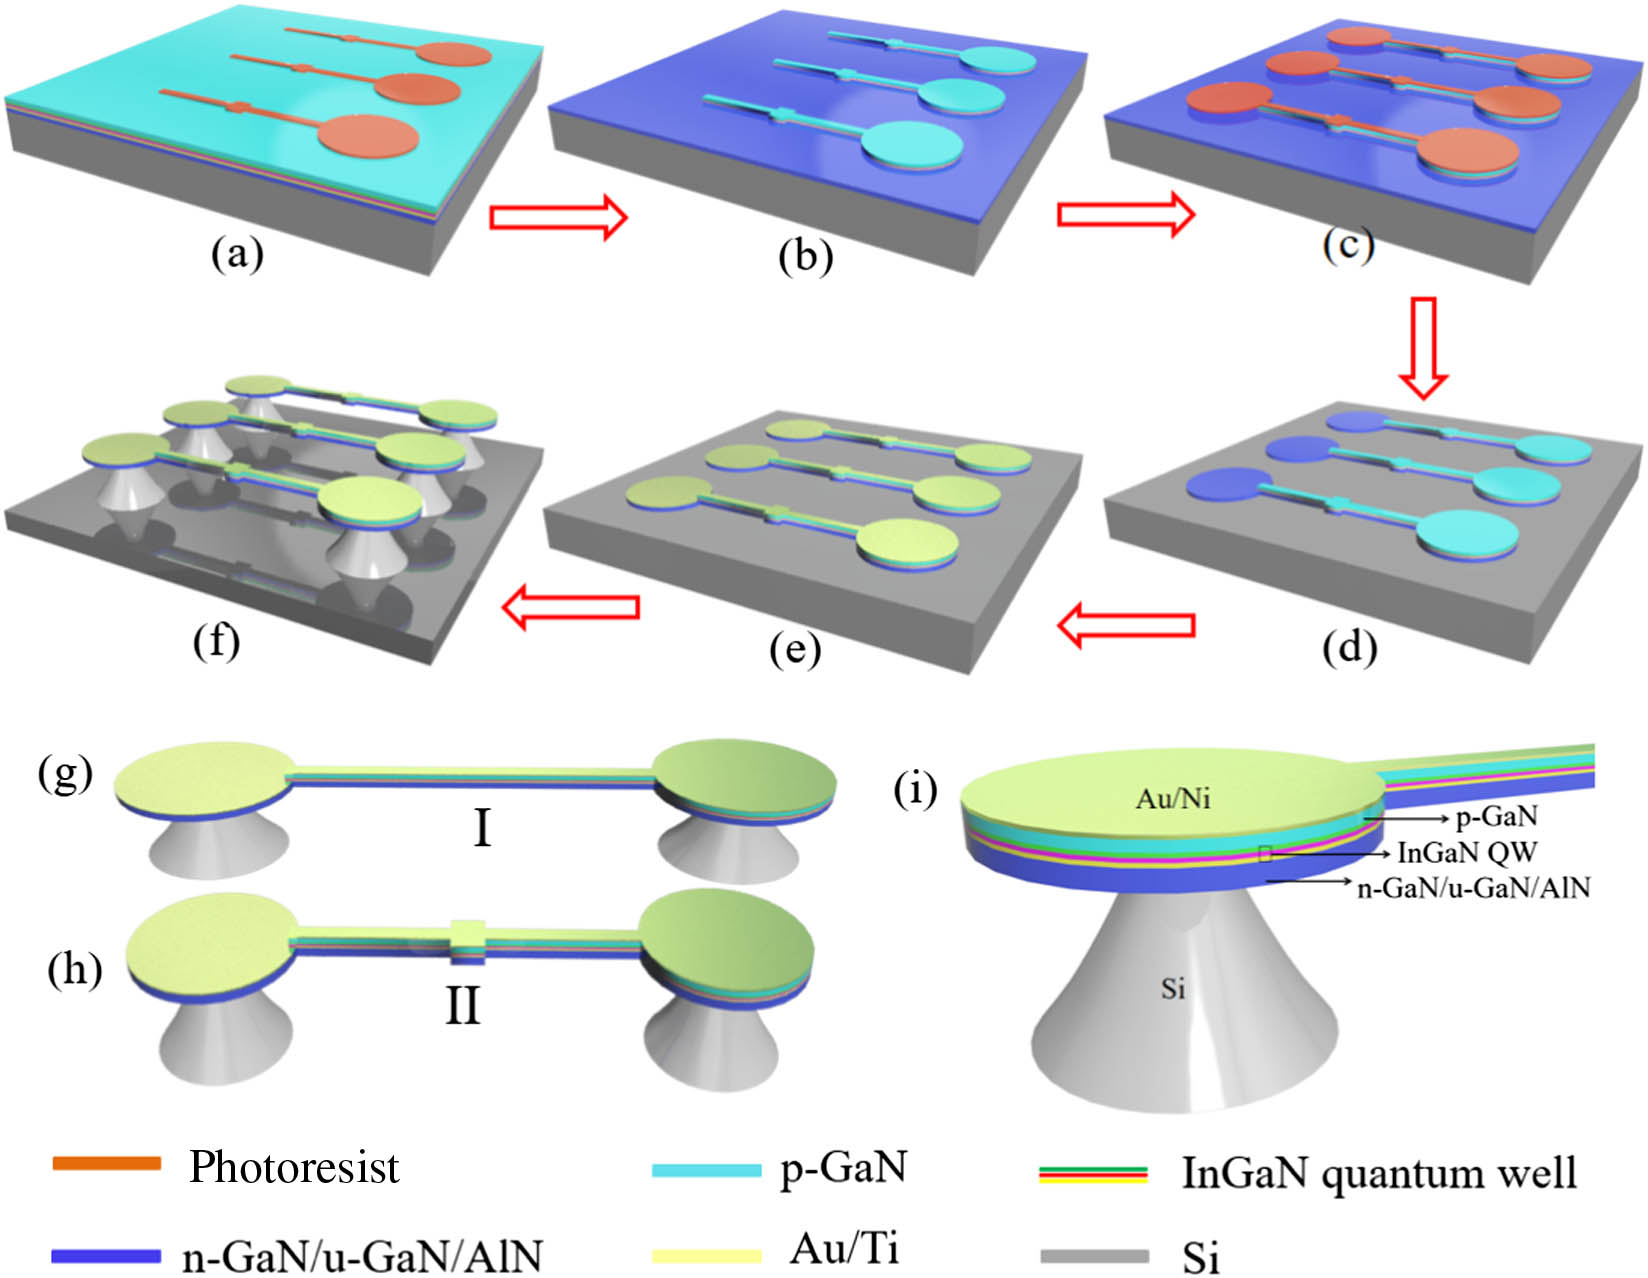 Fabrication process of GaN-LED accelerometer with beam structure: (a) patterning the photoresist, (b) etching to the n-GaN layer, (c) patterning the photoresist layer again, (d) etching to the Si substrate layer, (e) patterning the photoresist layer and preparing electrode, and (f) wet isotropic etching of silicon. Schematics of beam GaN-LED accelerometers with two structures: (g) type I, (h) type II. (i) Cross-sectional image for part of the GaN beam devices.